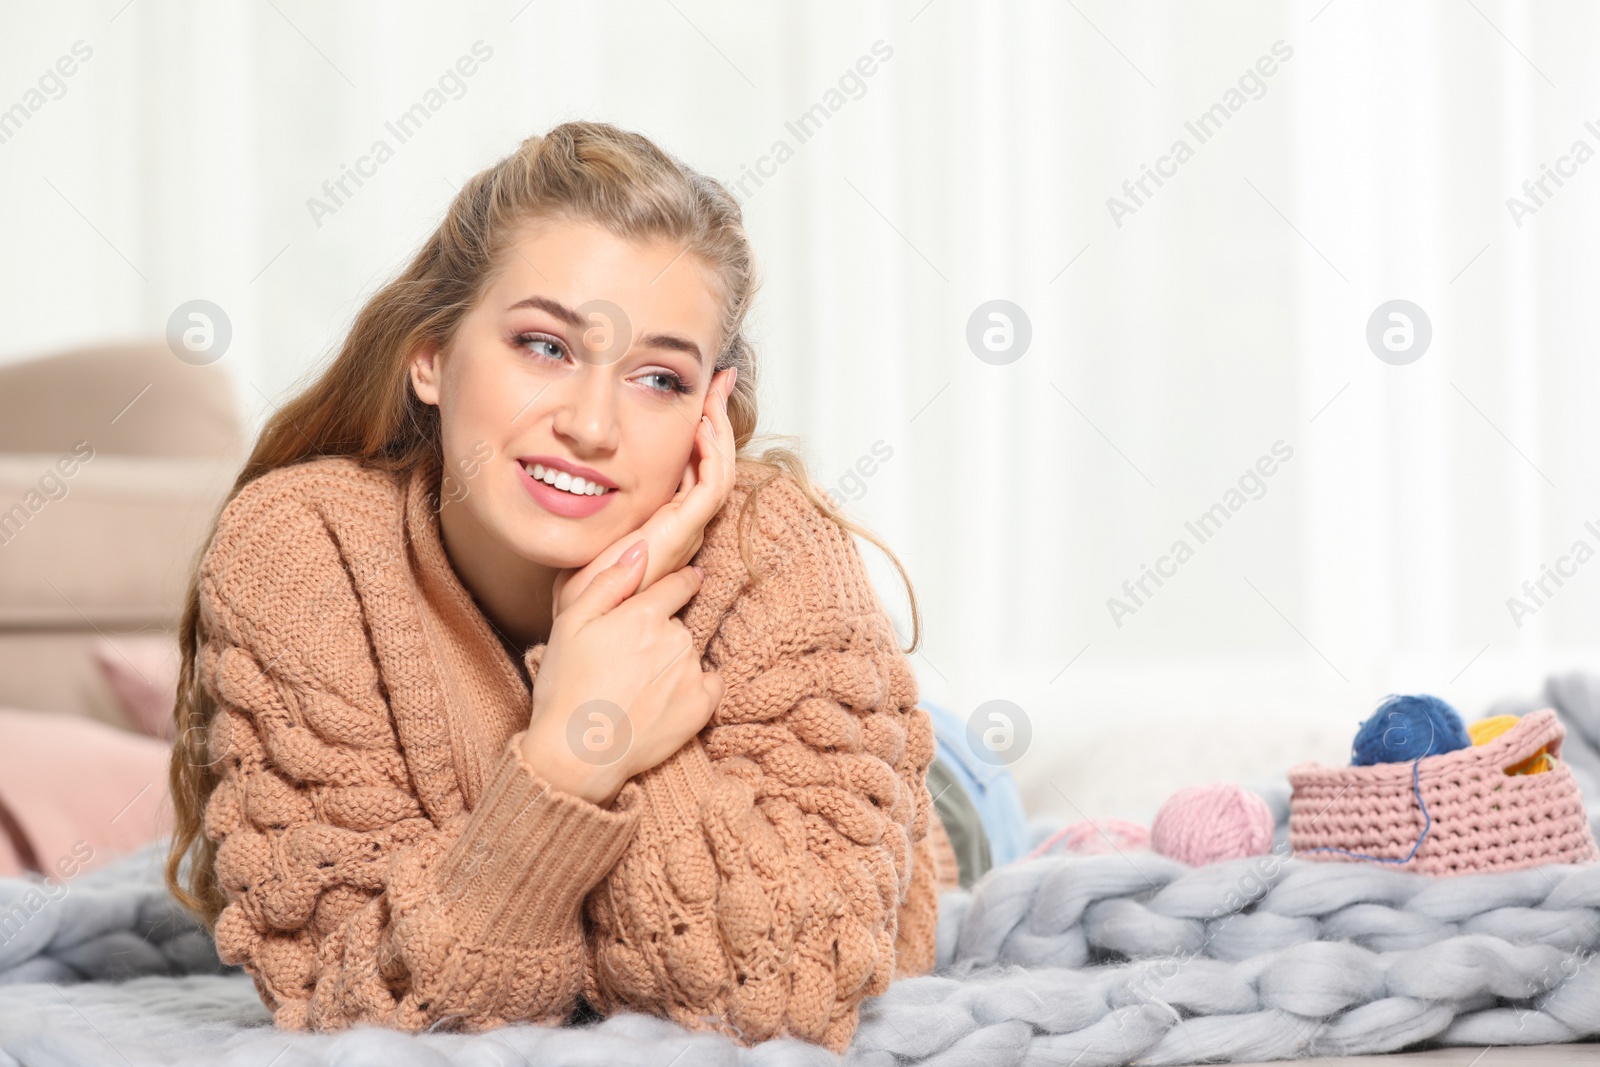 Photo of Attractive smiling young woman in cozy warm sweater lying on floor at home. Space for text